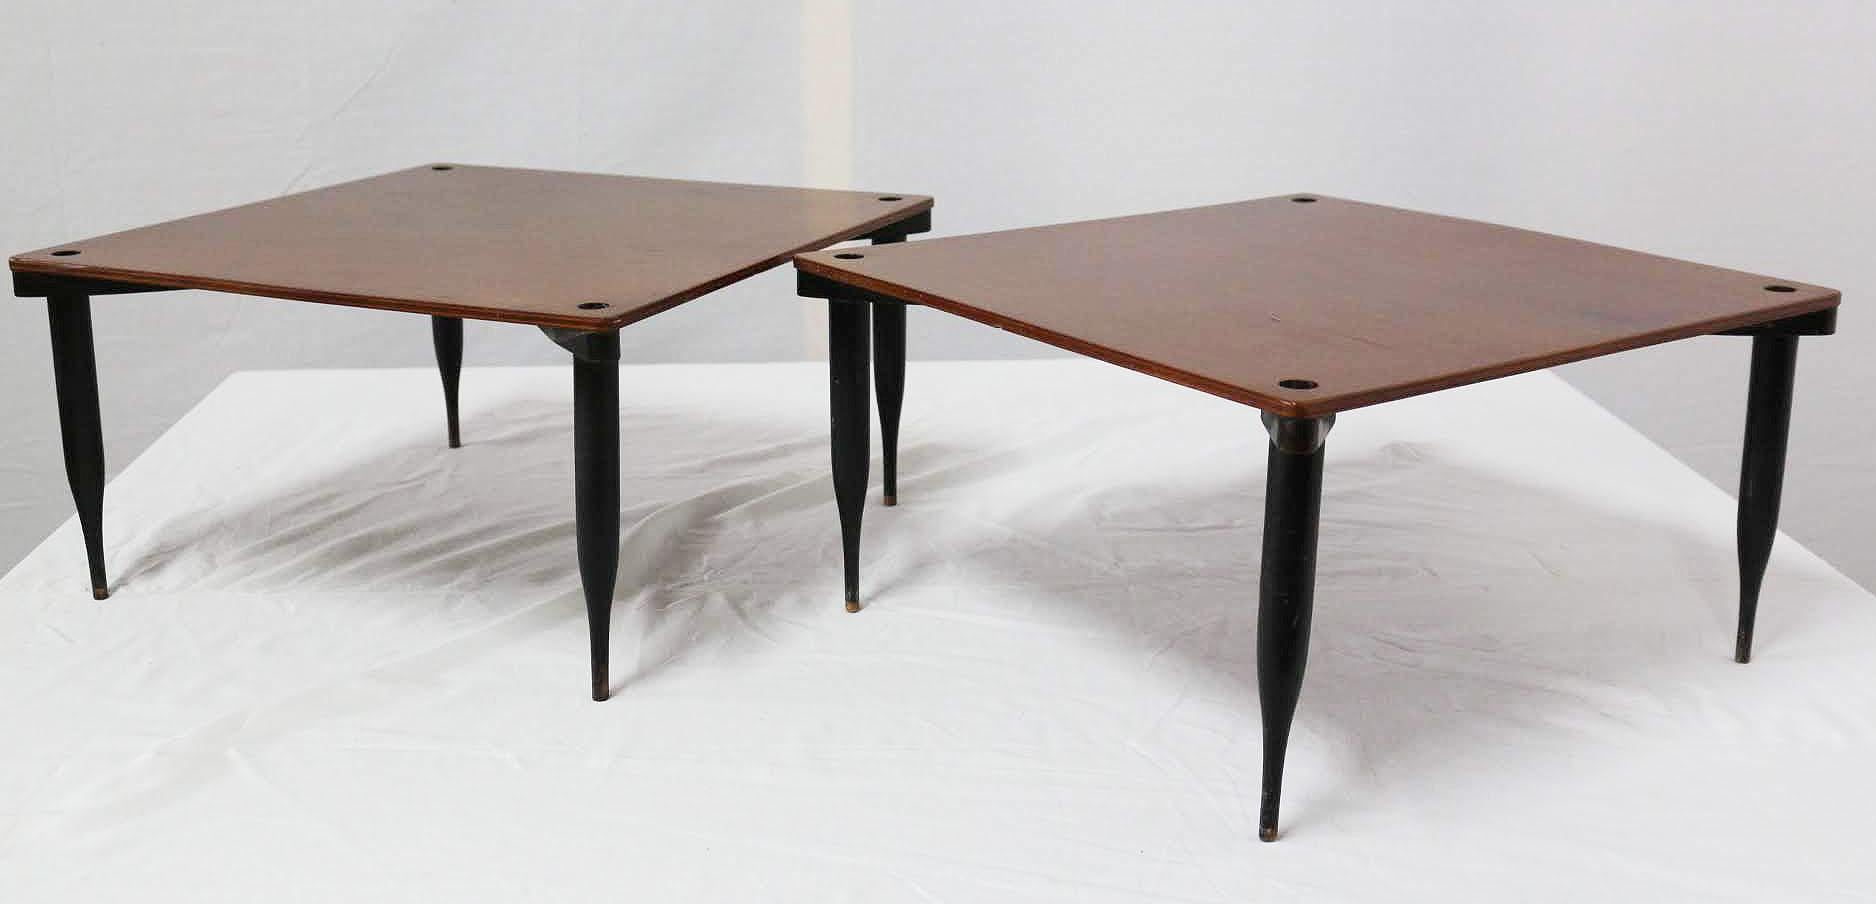 Two stackable tables by Vico Magistretti for Azucena, Italy, circa 1954
Provenance from the estate of Italian designer and Architect Renato Magri friend and contemporary of Vico Magistretti designer and architect
In very good vintage condition